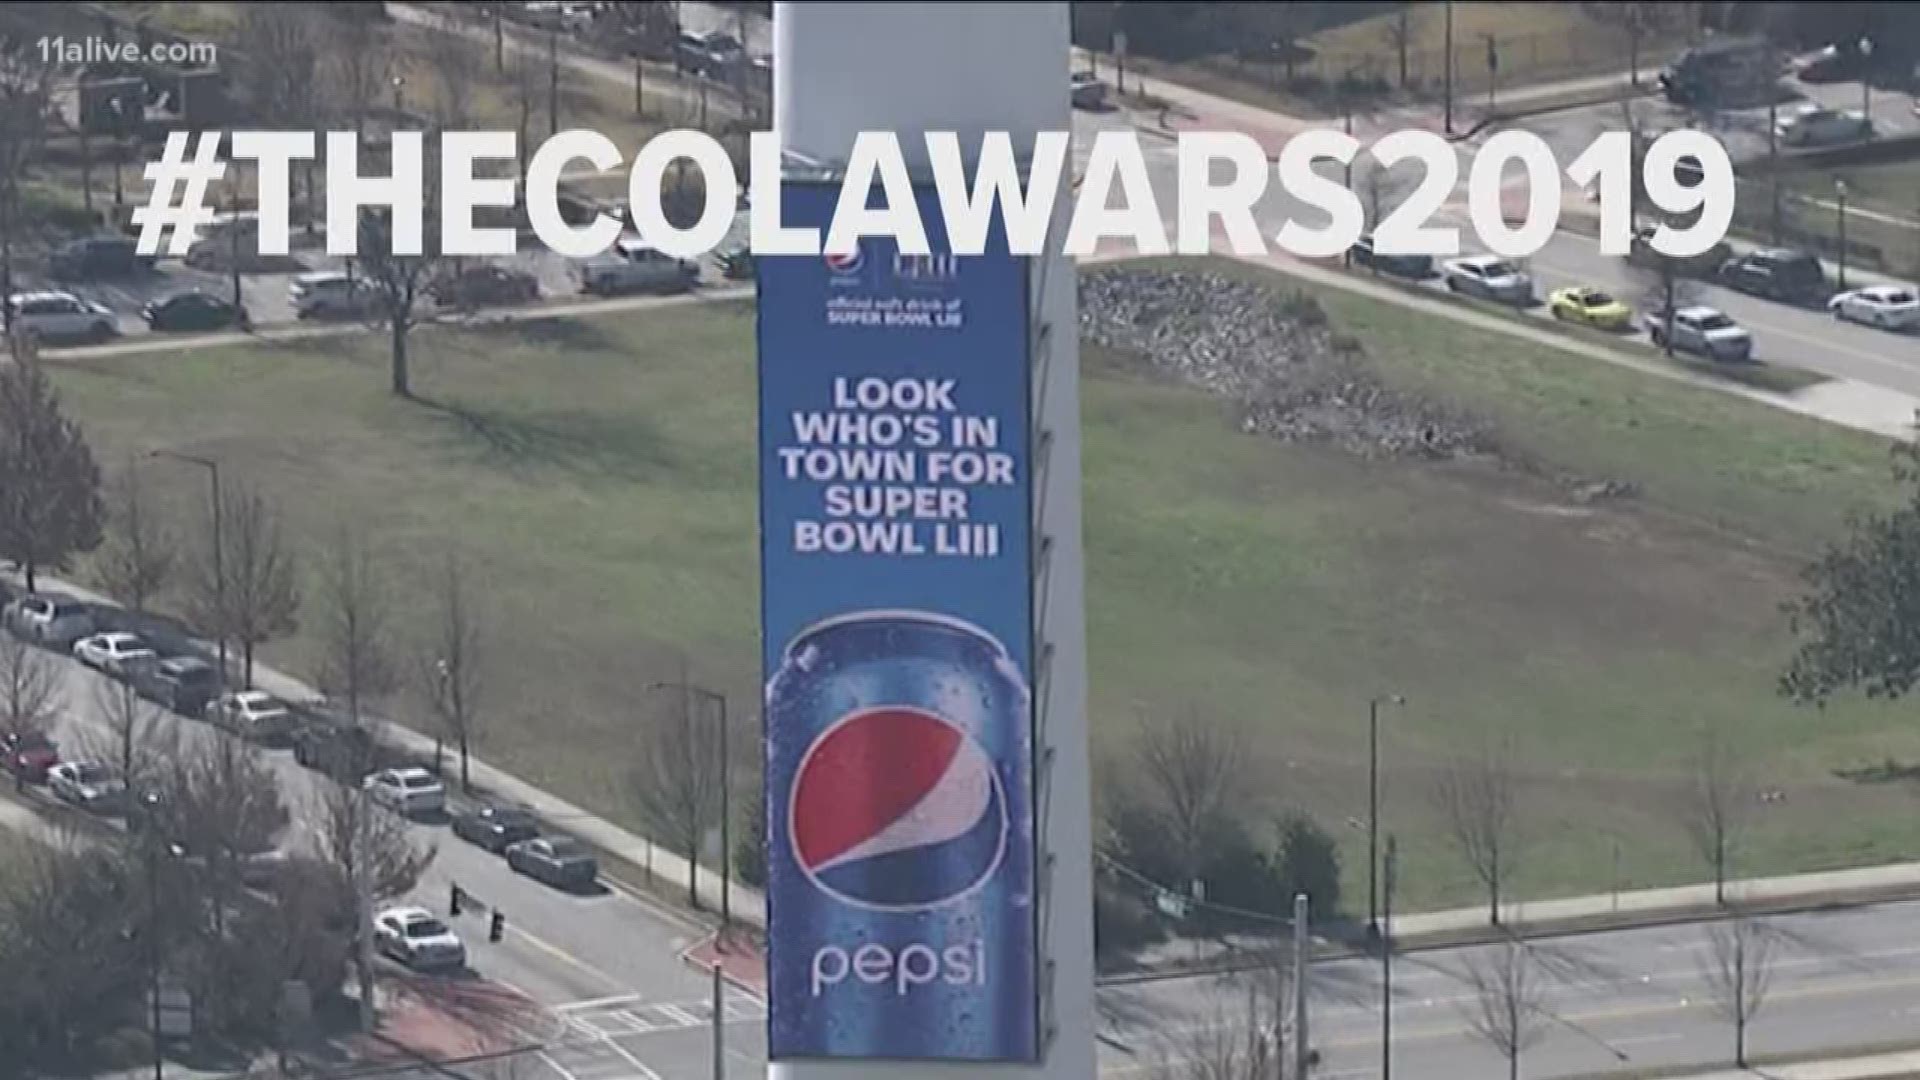 The battle between Pepsi and Coca-Cola is on before the Super Bowl. Check out the ads.